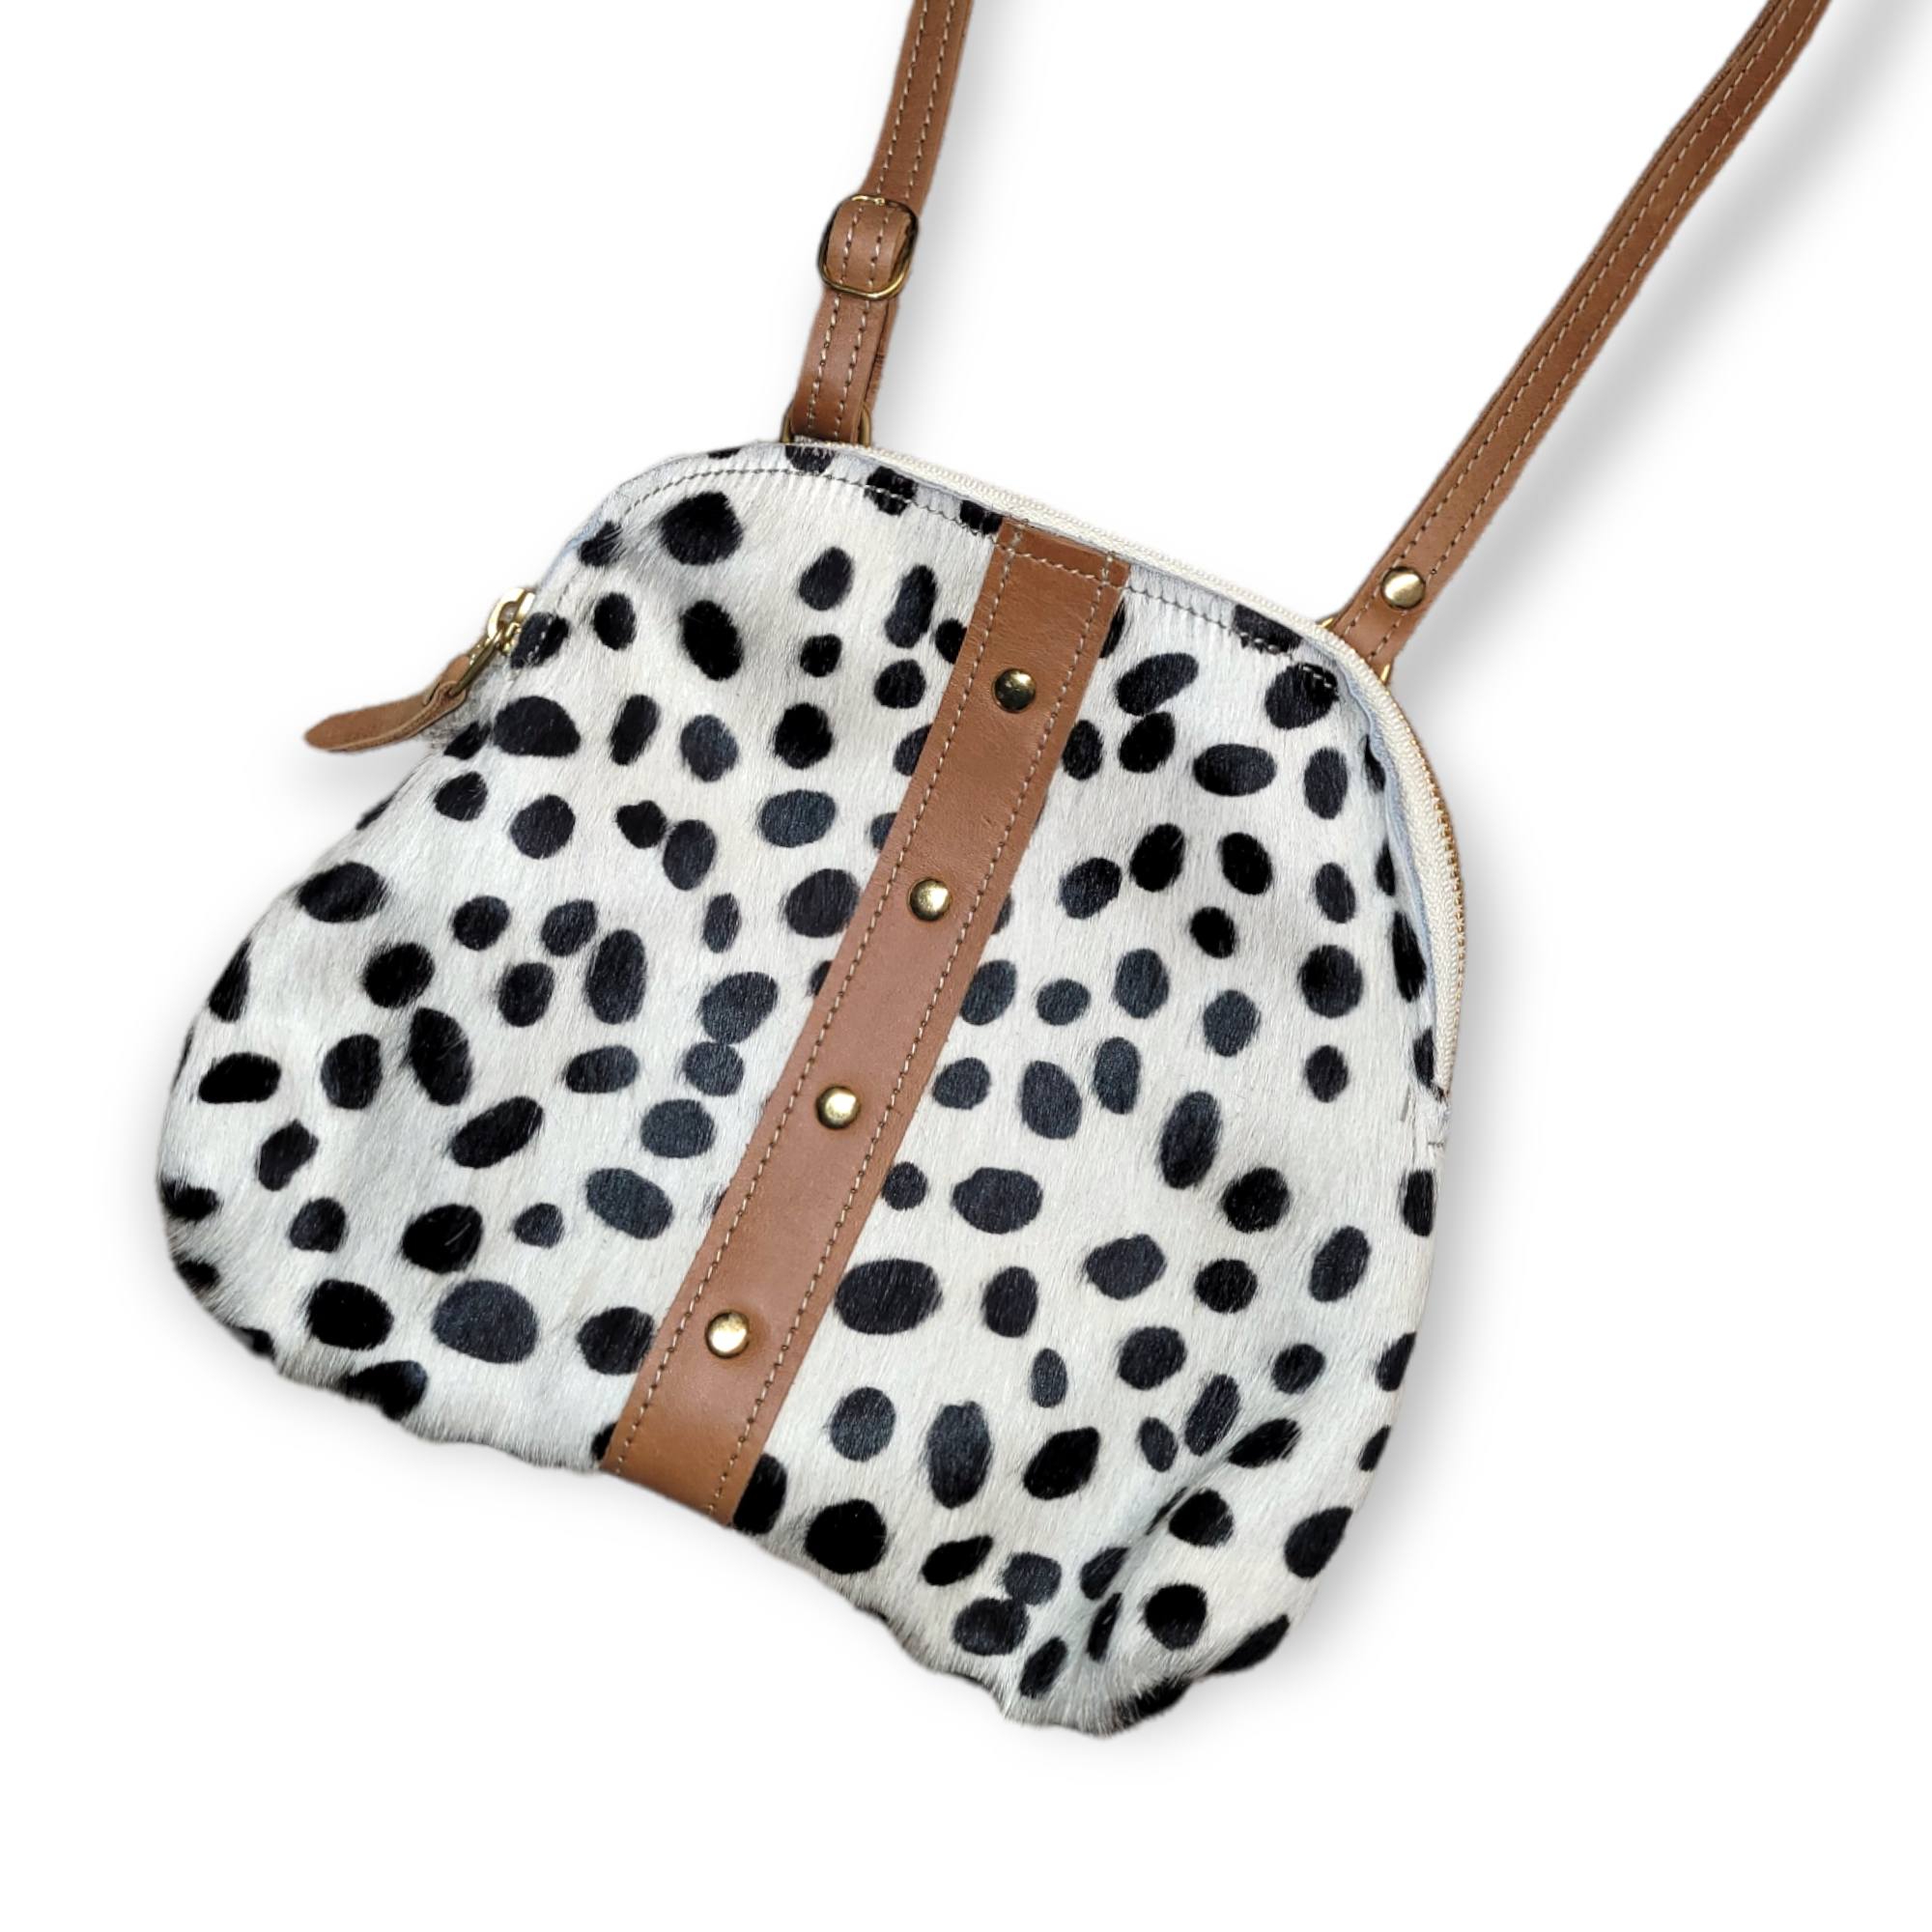 Genuine Leather Millie Crossbody Cheetah-Handbags-LouisGeorge Boutique-LouisGeorge Boutique, Women’s Fashion Boutique Located in Trussville, Alabama